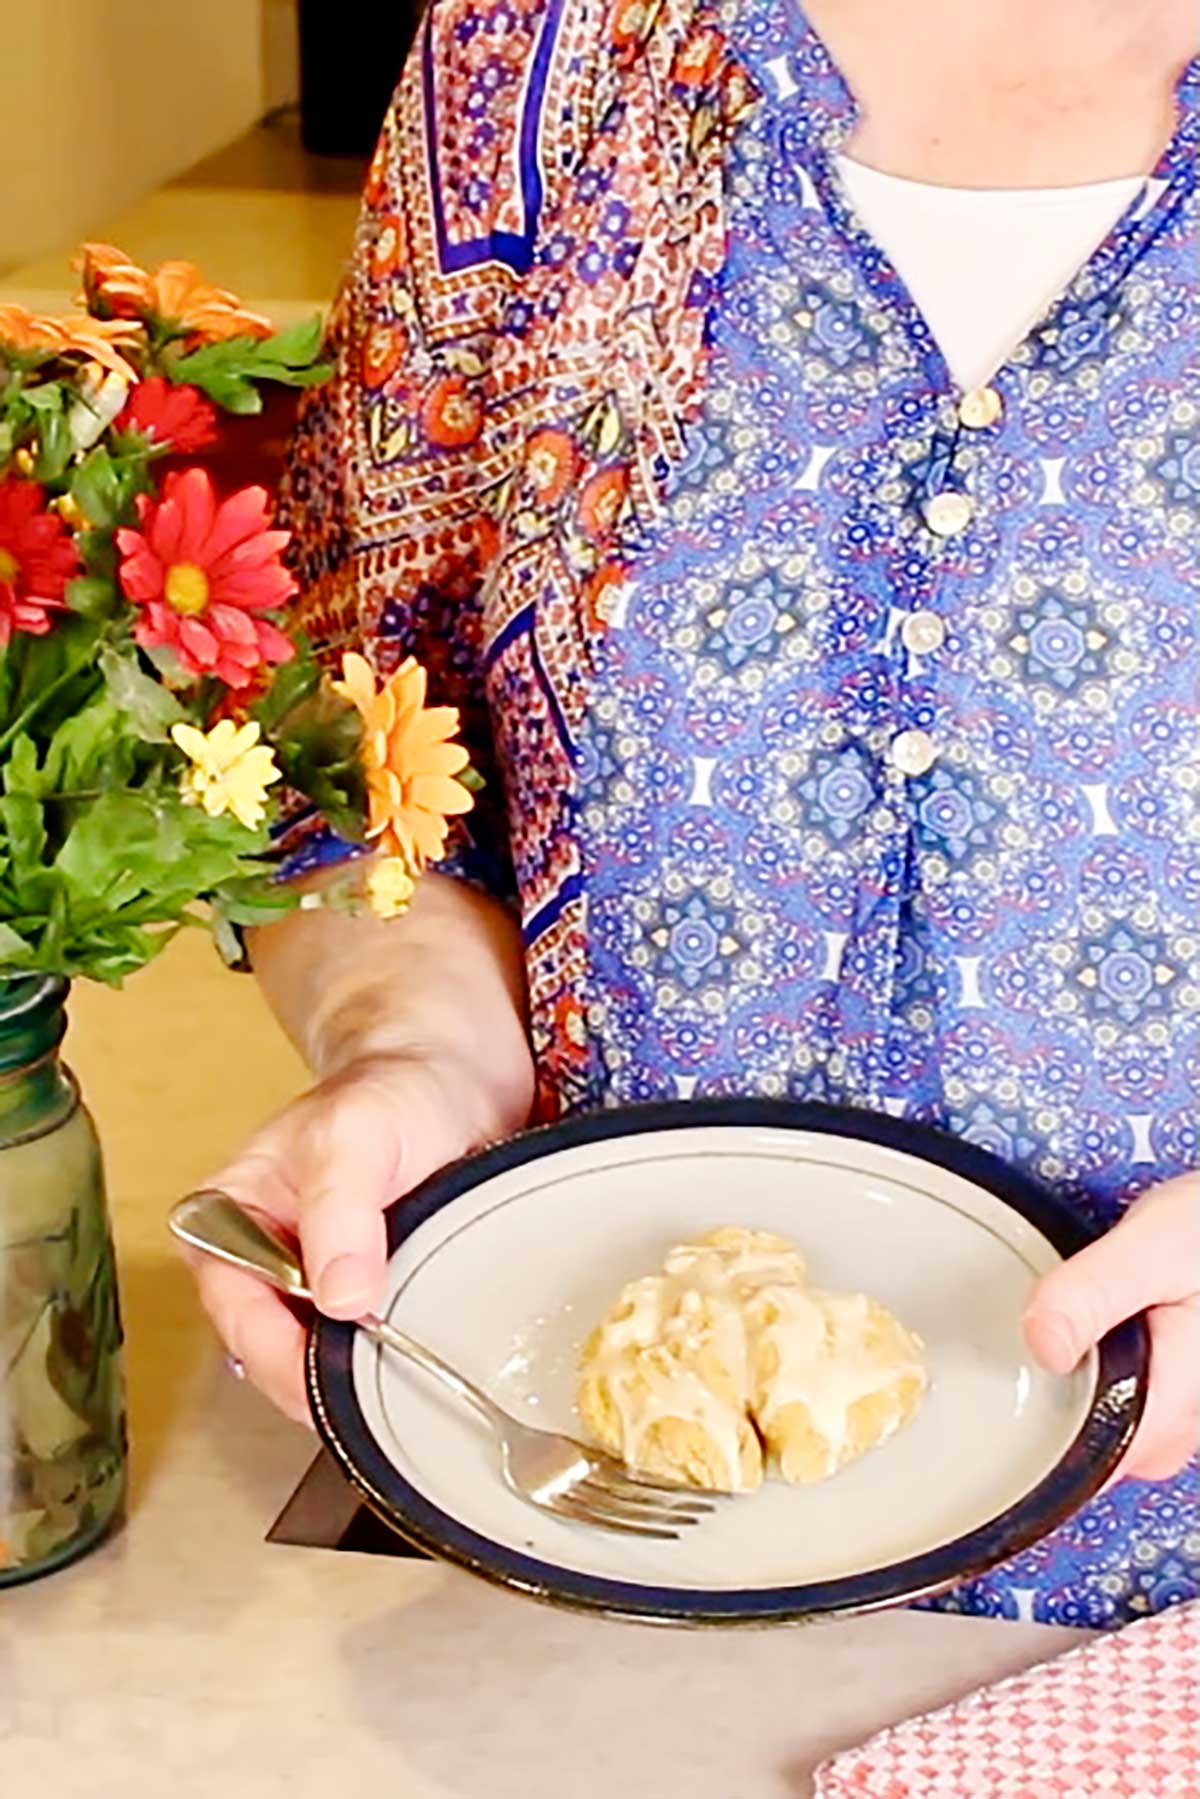 Woman in blue and orange print top holds a plate with an iced pumpkin scone near some flowers in a mason jar.